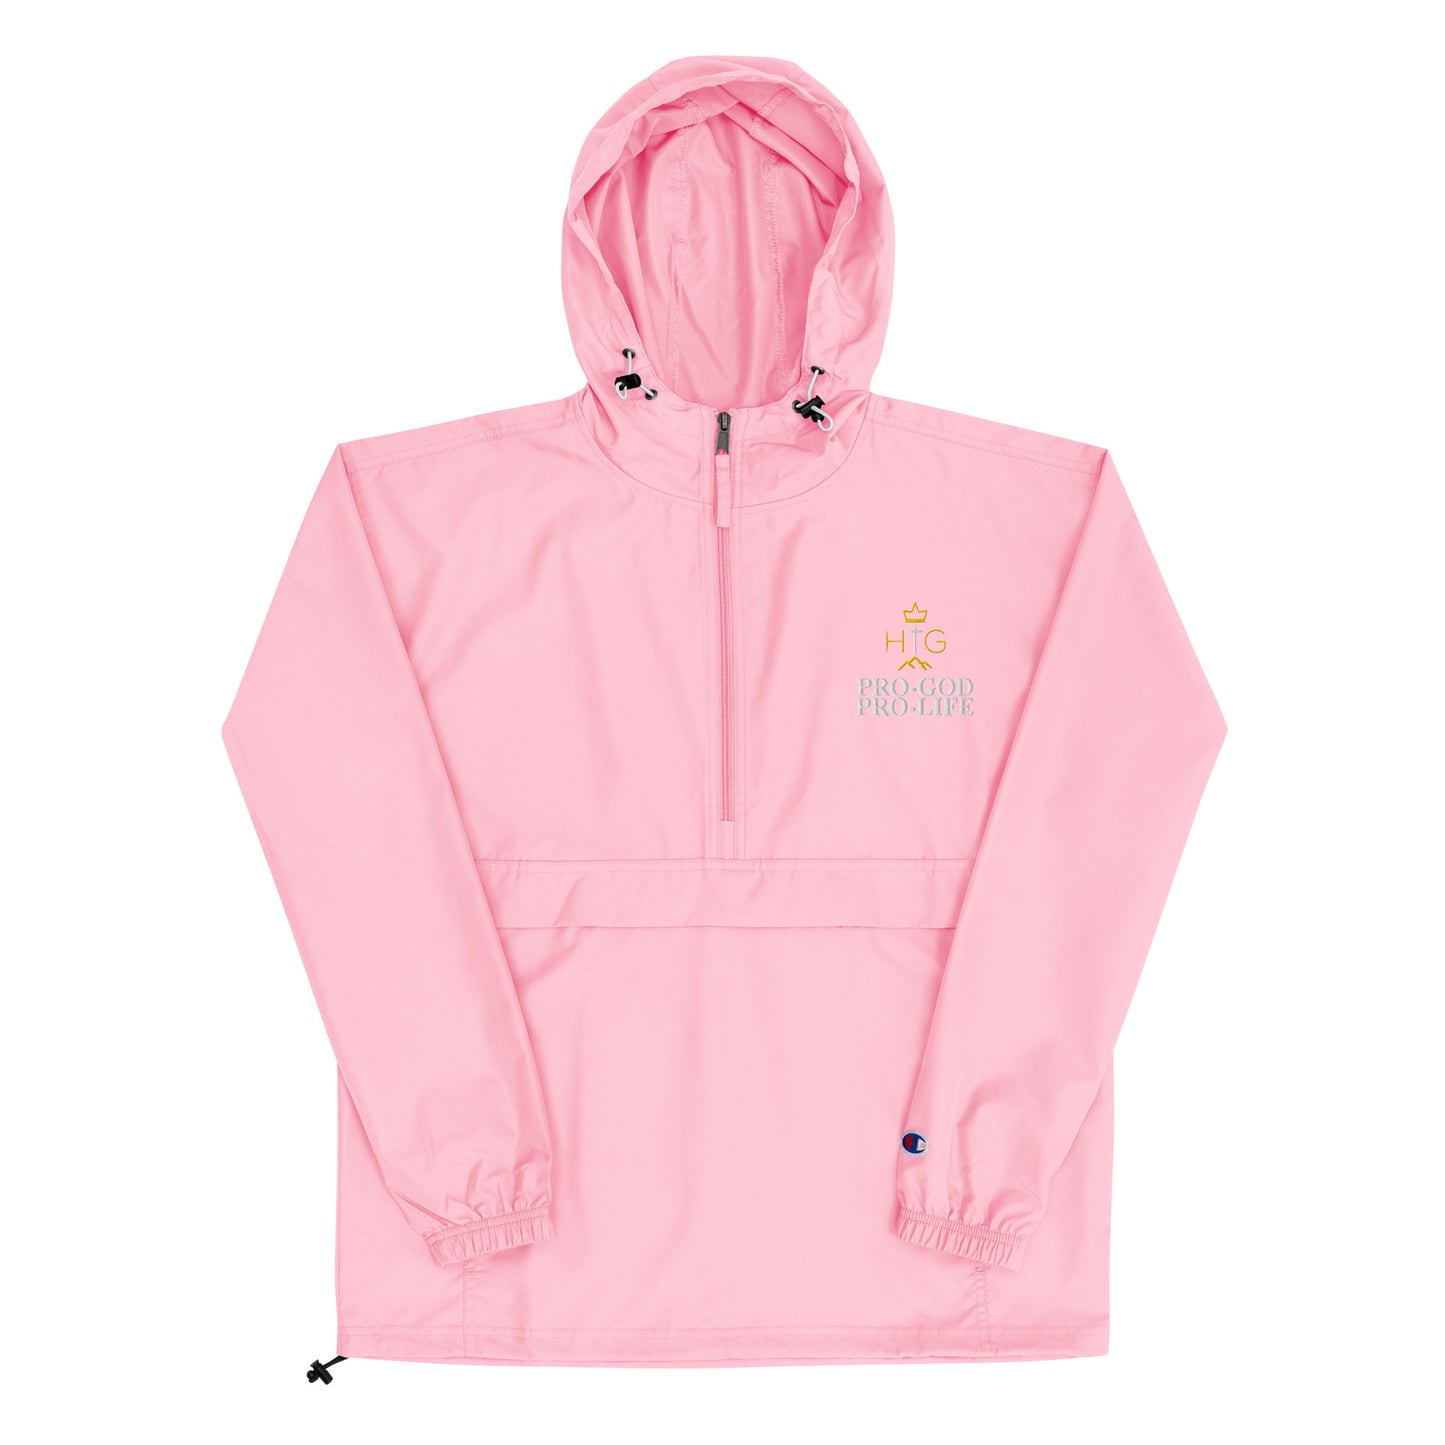 Pro God Pro Life - Logo Top - Embroidered Champion Packable Jacket